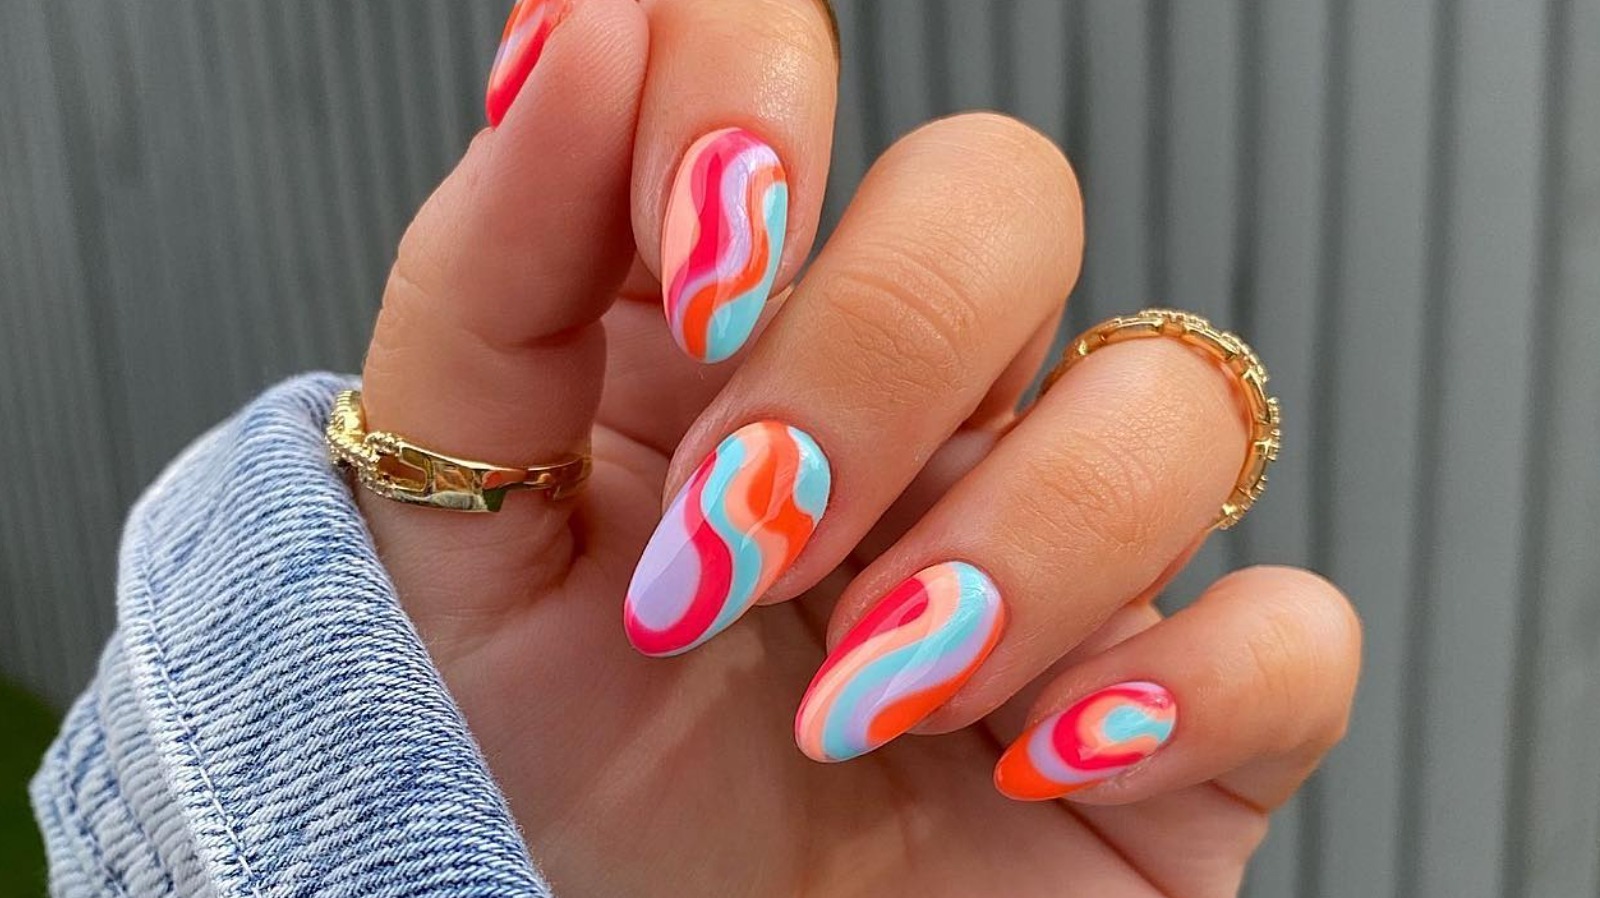 This Year's Top 6 Biggest Nail Trends - Behindthechair.com